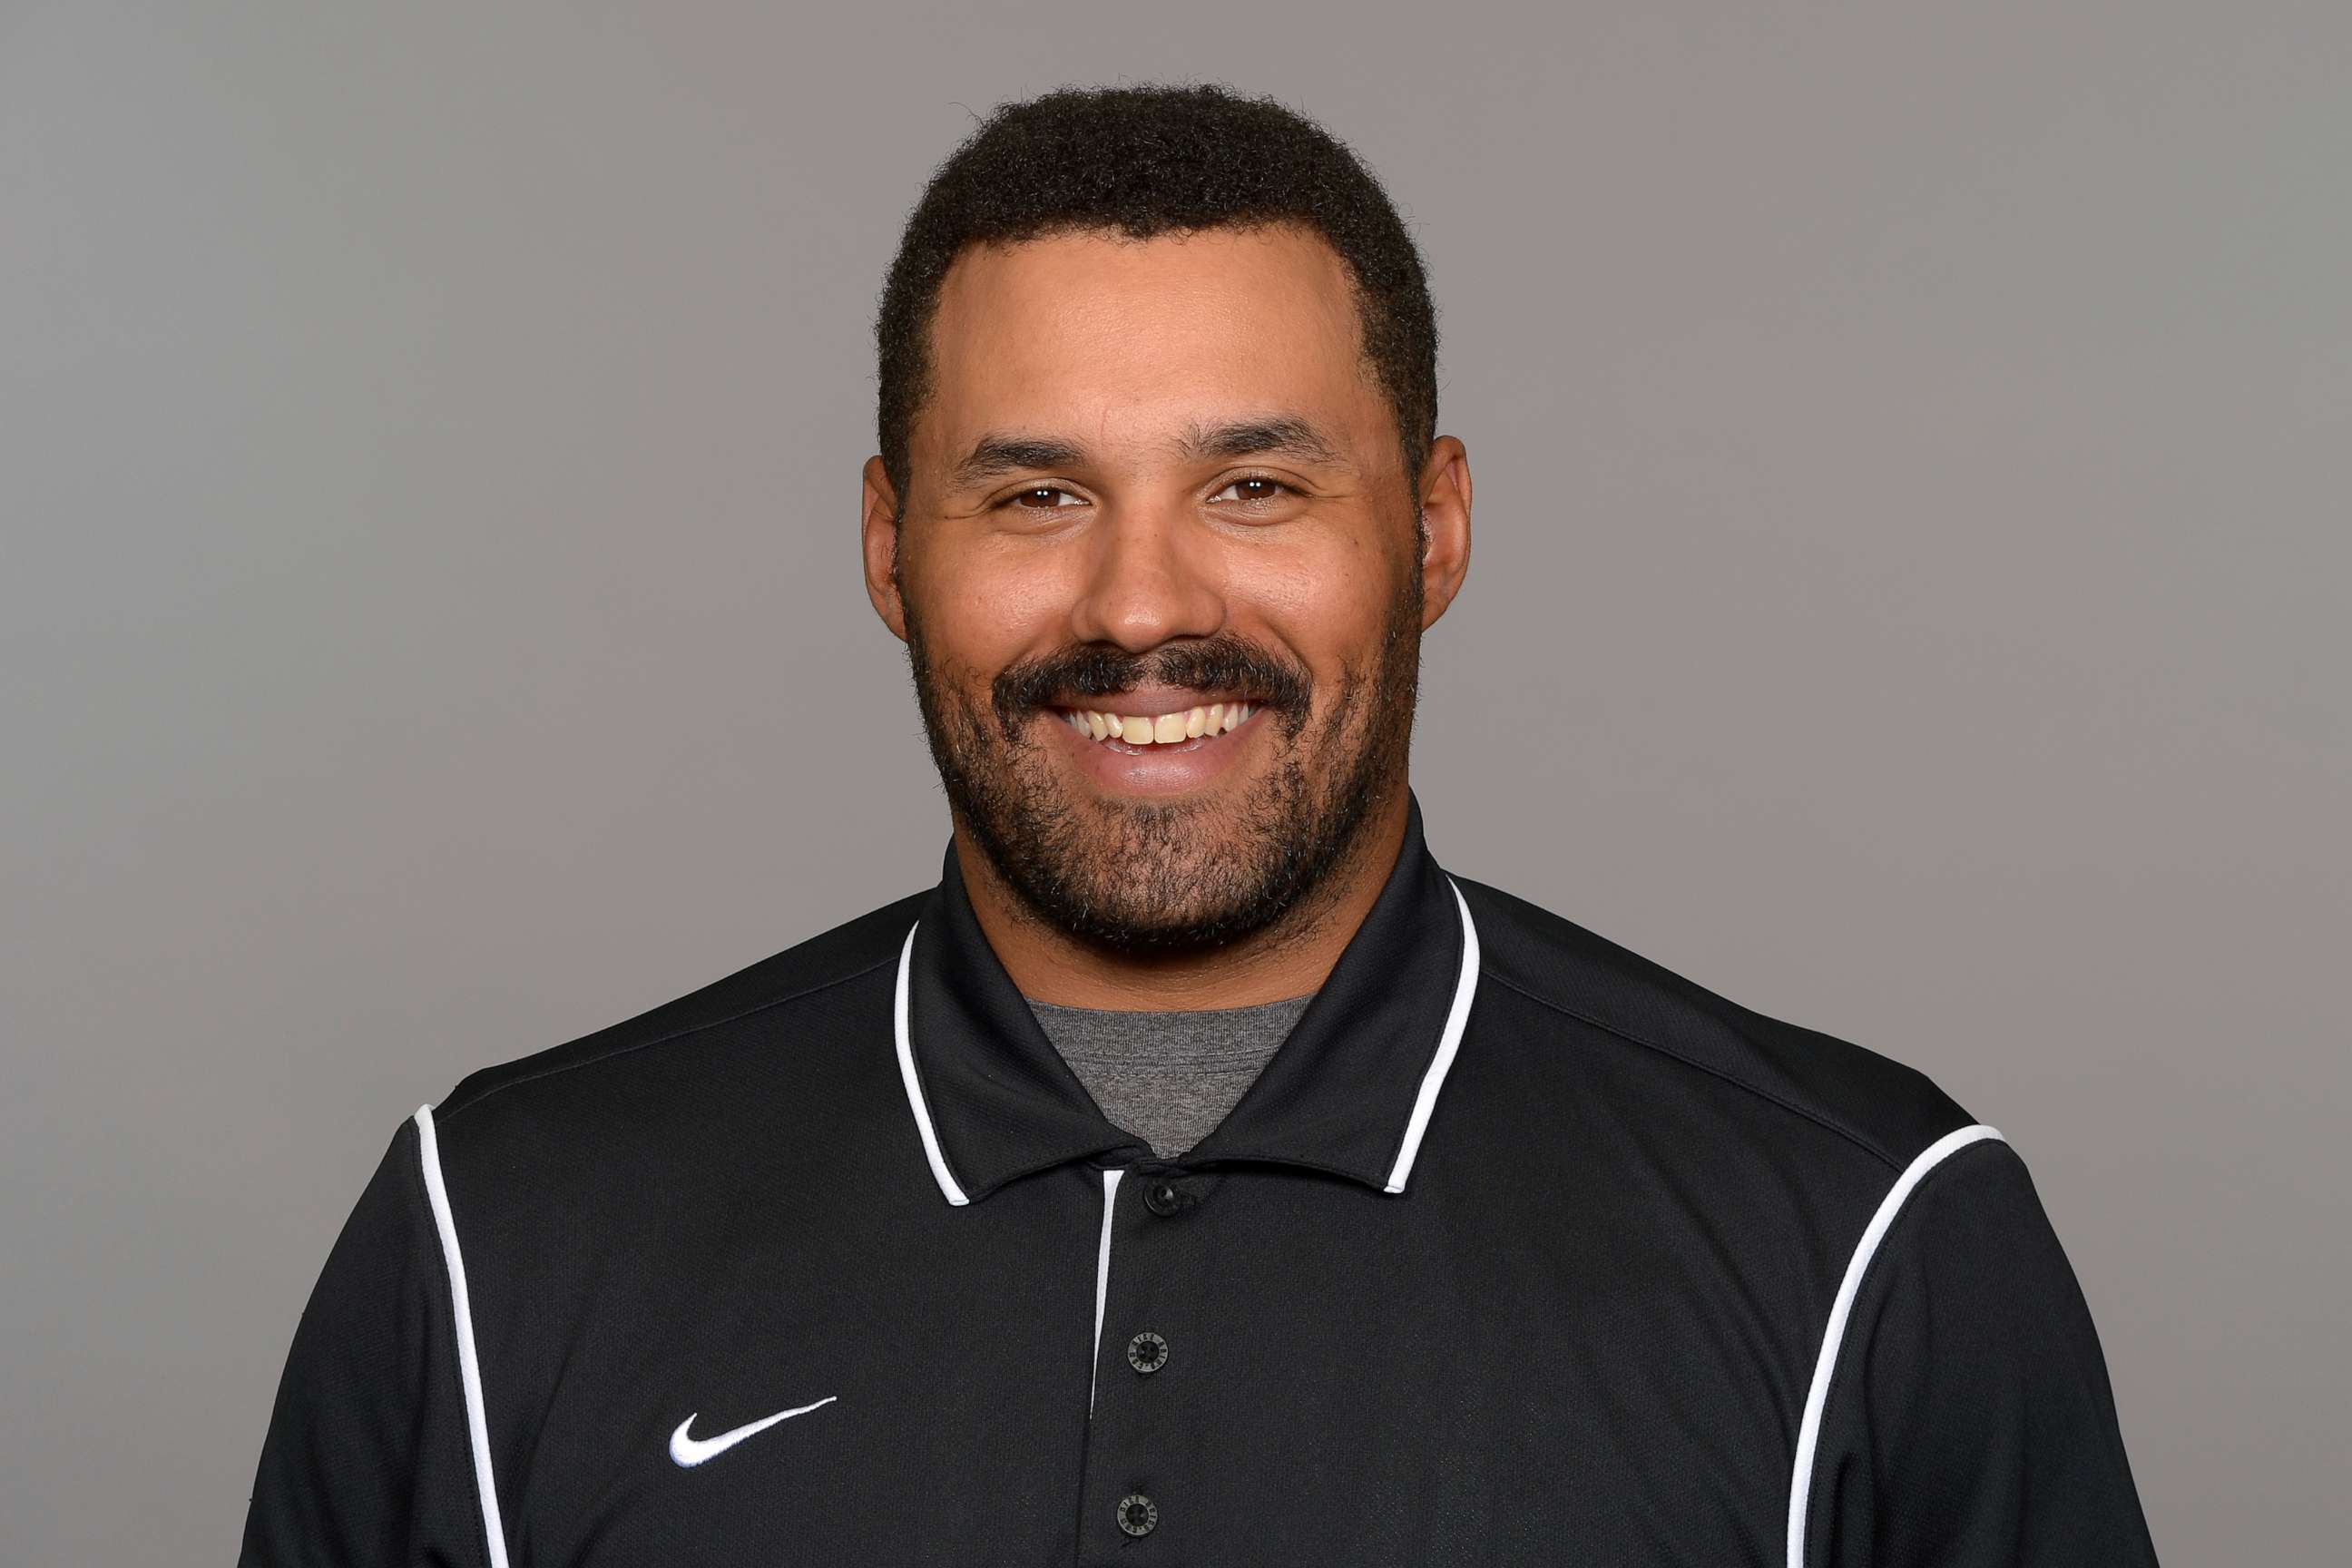 PHOTO: FILE - Kevin Maxen of the Jacksonville Jaguars NFL football team poses for a photo in June 2021. Maxen, an associate strength coach with the Jaguars, has become the first male coach in a major U.S.-based professional league to come out as gay.